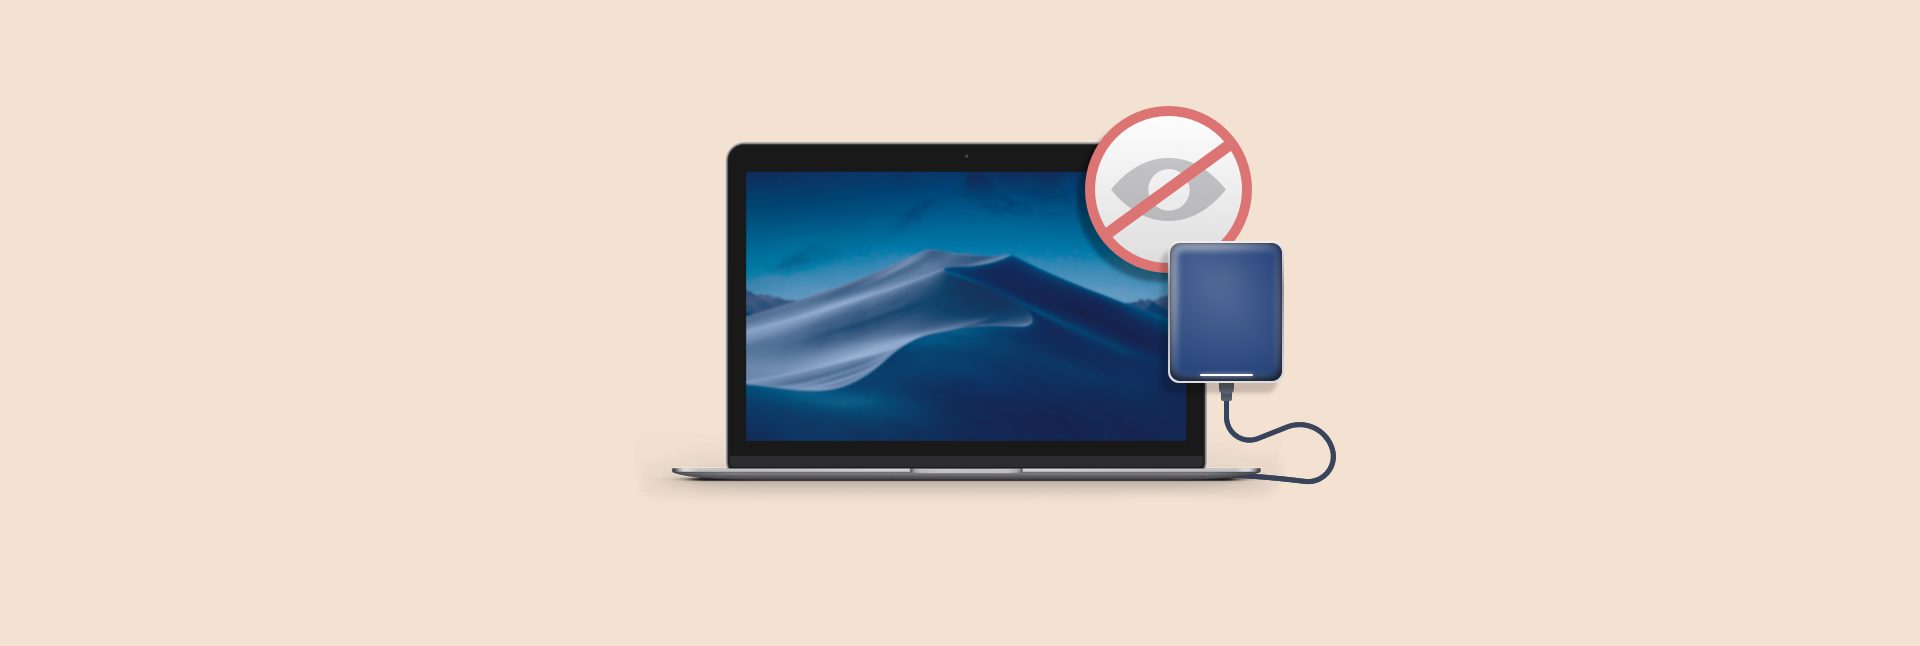 How to Access an External Drive That's Not Recognized On Mac?